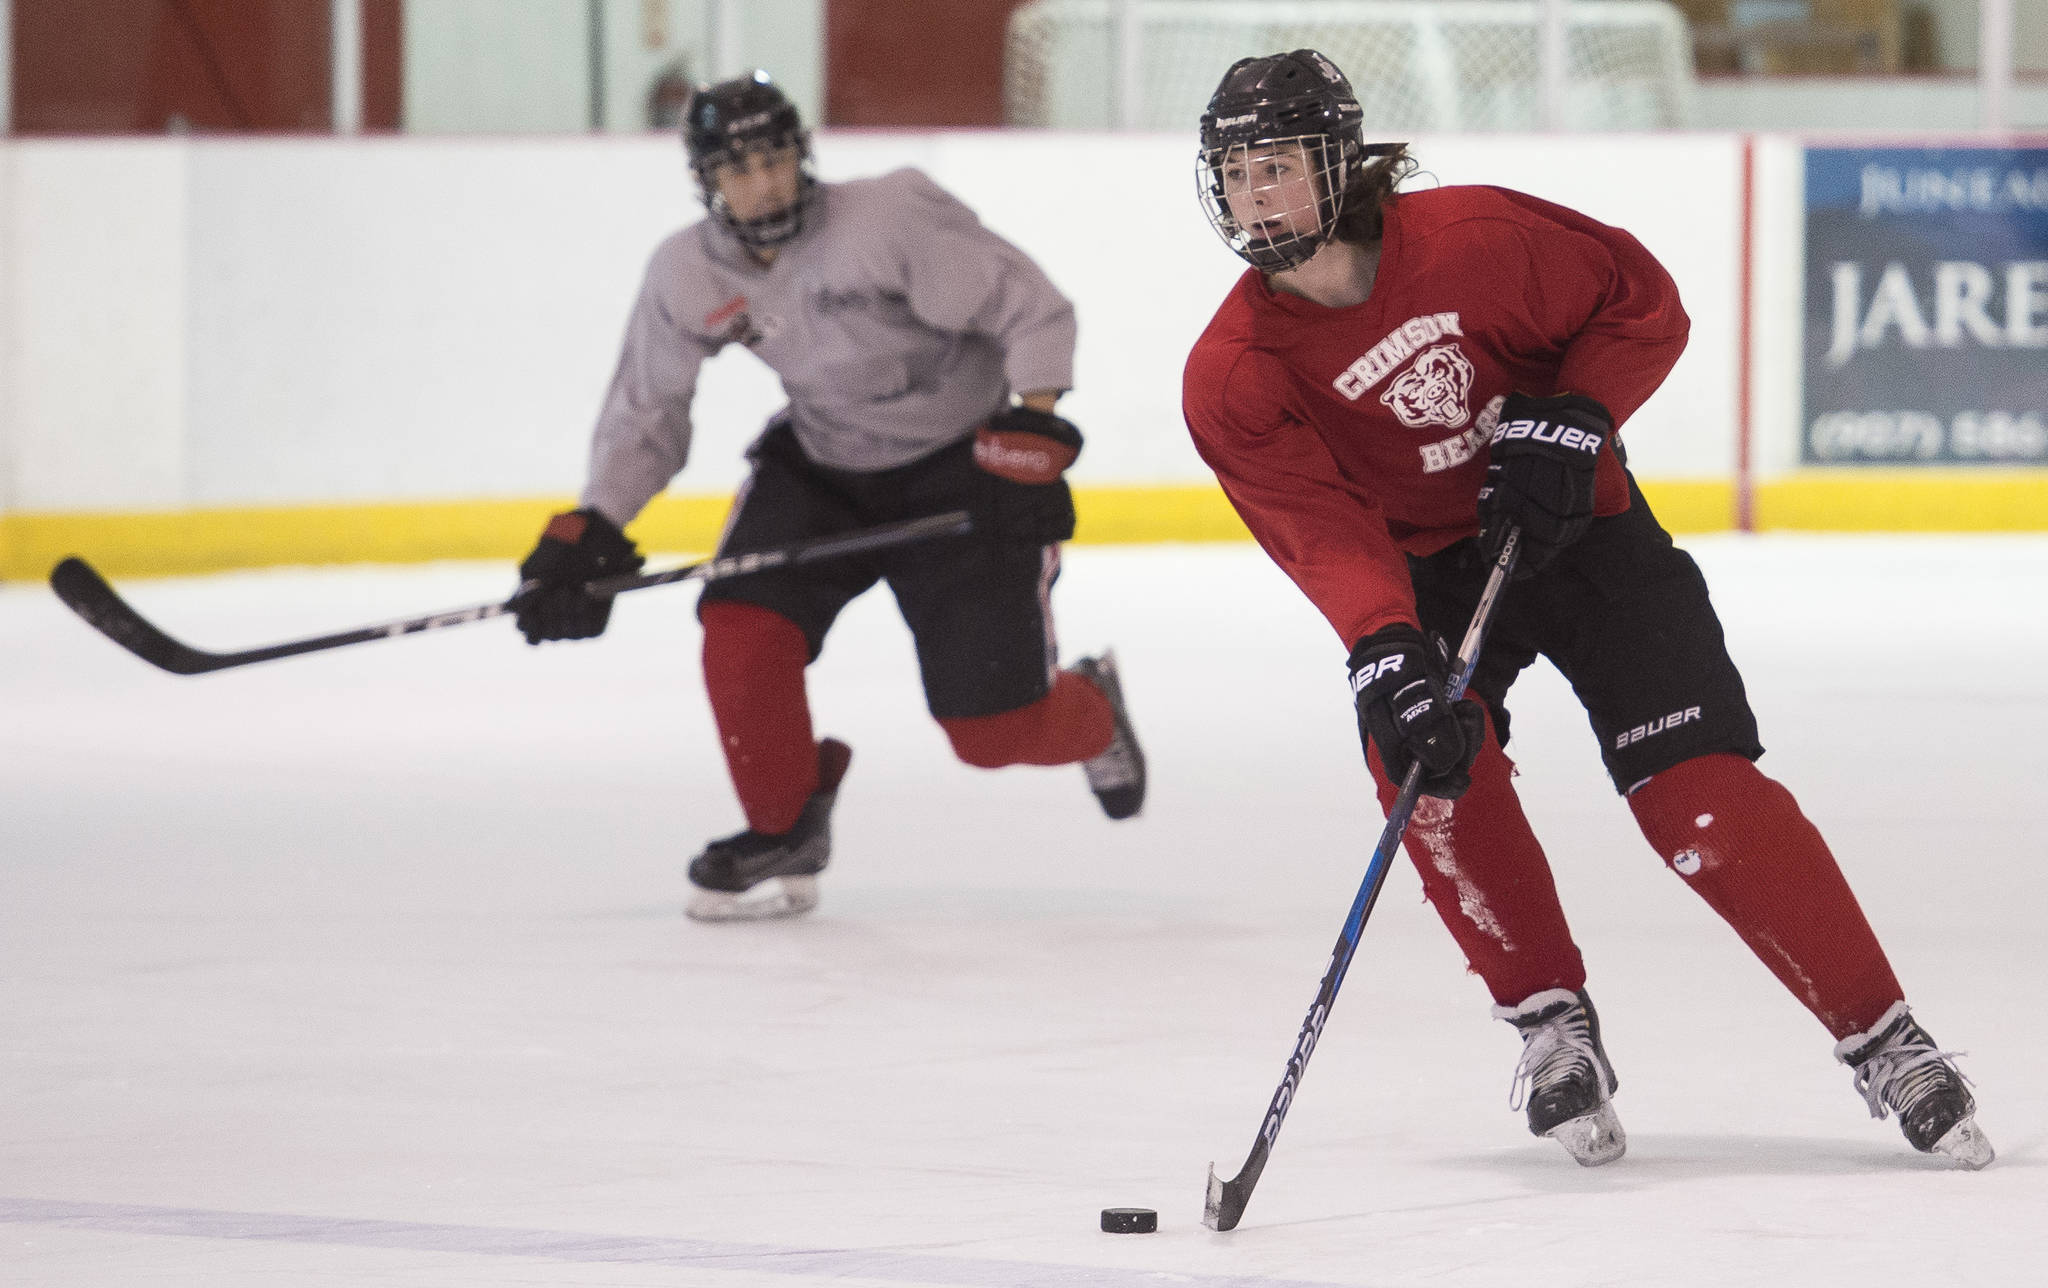 Cameron Smith, right, brings the puck up with Joseph Monsef during Juneau-Douglas High School hockey practice at the Treadwell Arena on Thursday, Nov. 16, 2017. (Michael Penn | Juneau Empire)